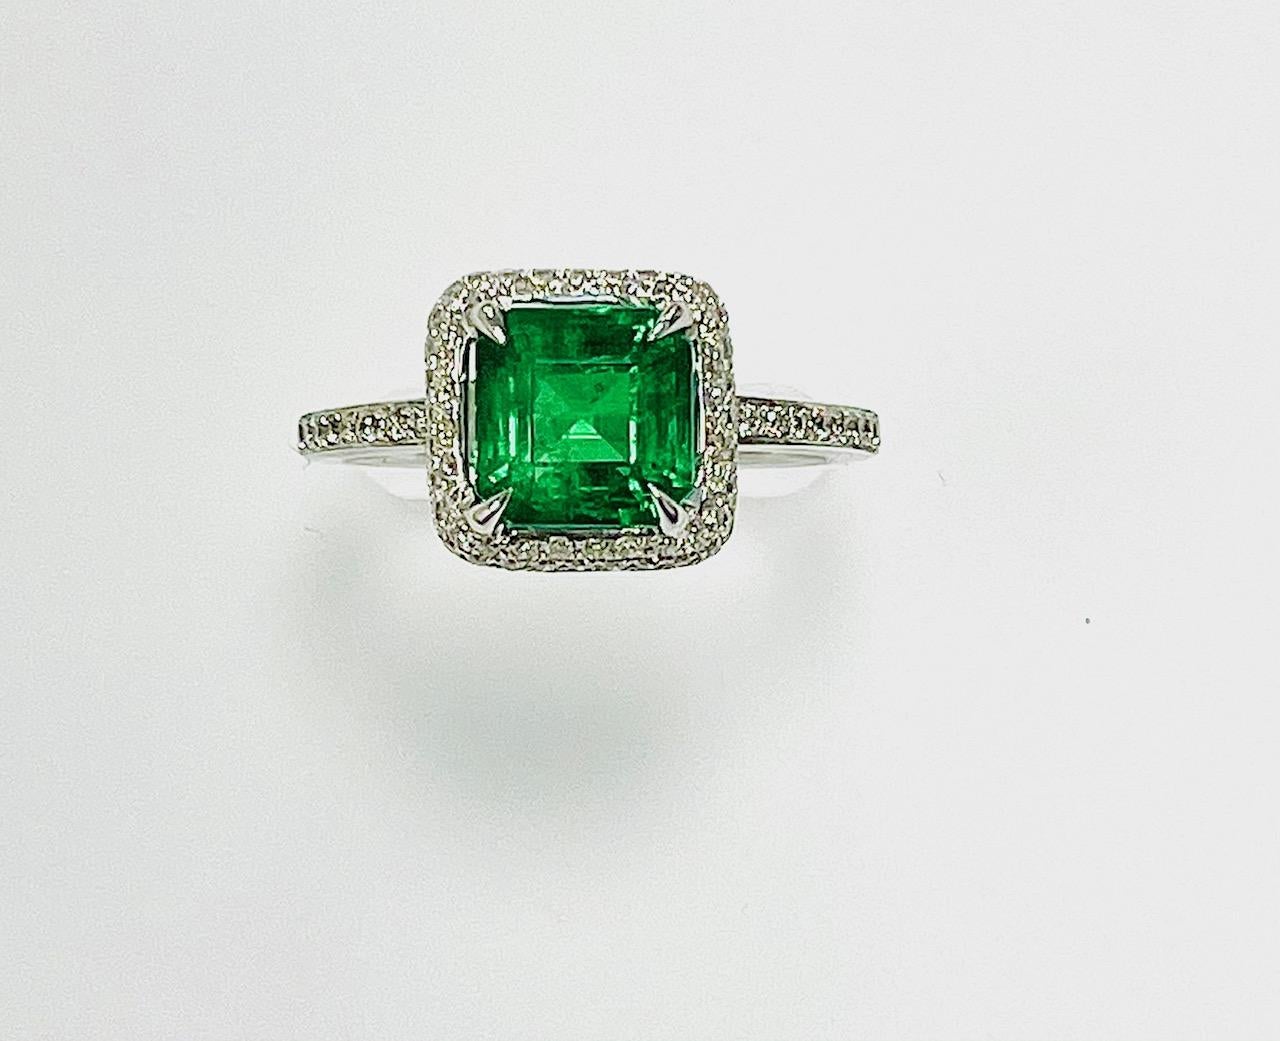 1.46 Carat Sqaure cut Zambian emerald set in 18k white gold ring with 0.38 carat diamonds around it and half way on the shank .